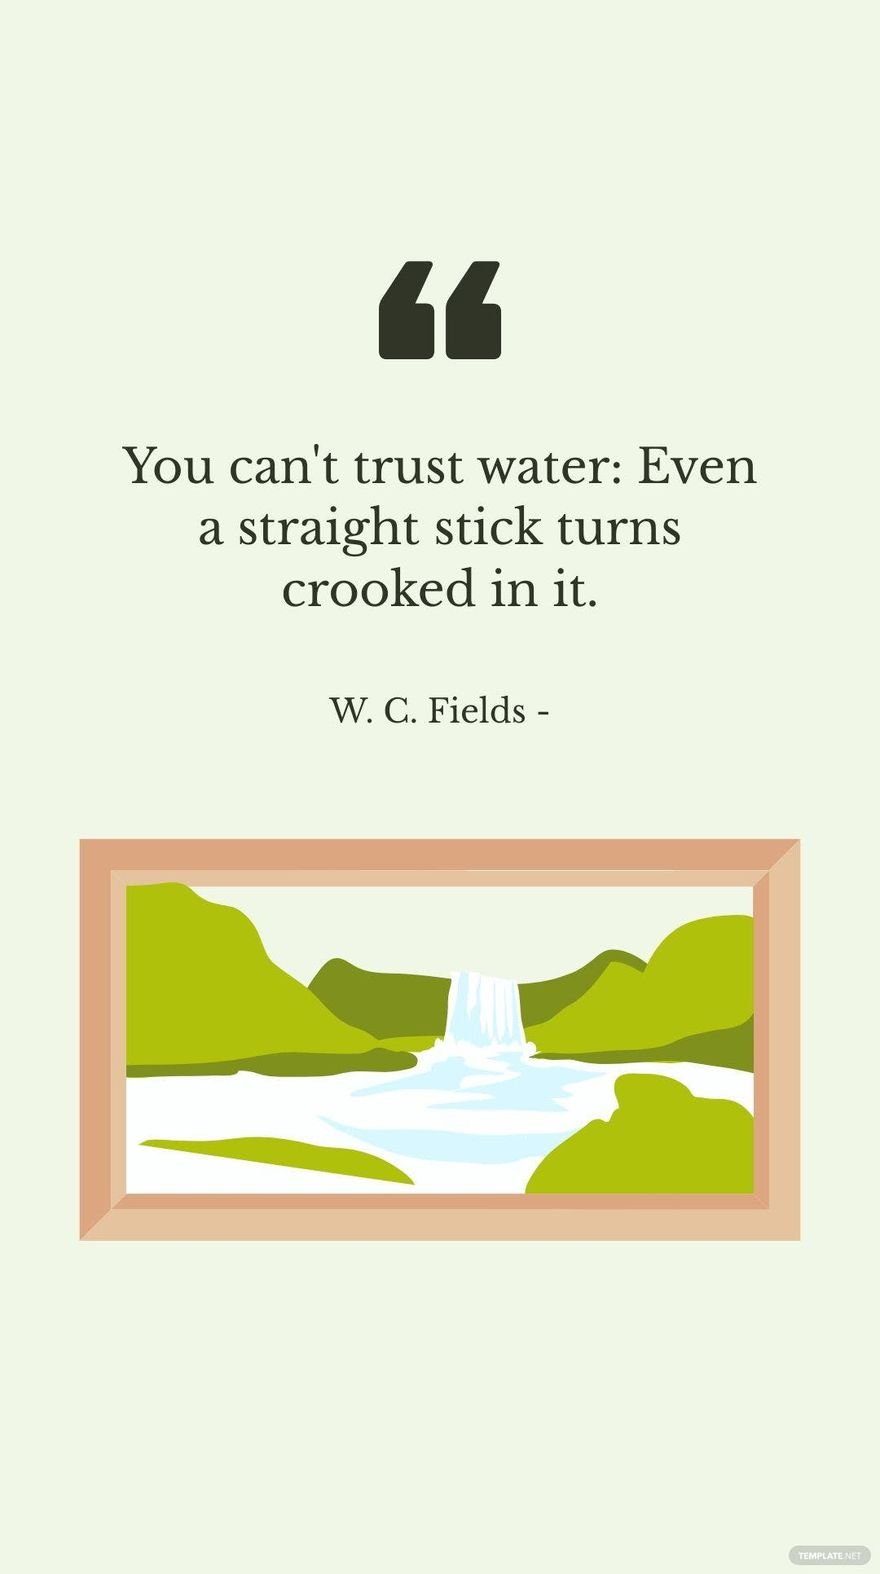 W. C. Fields - You can't trust water: Even a straight stick turns crooked in it.